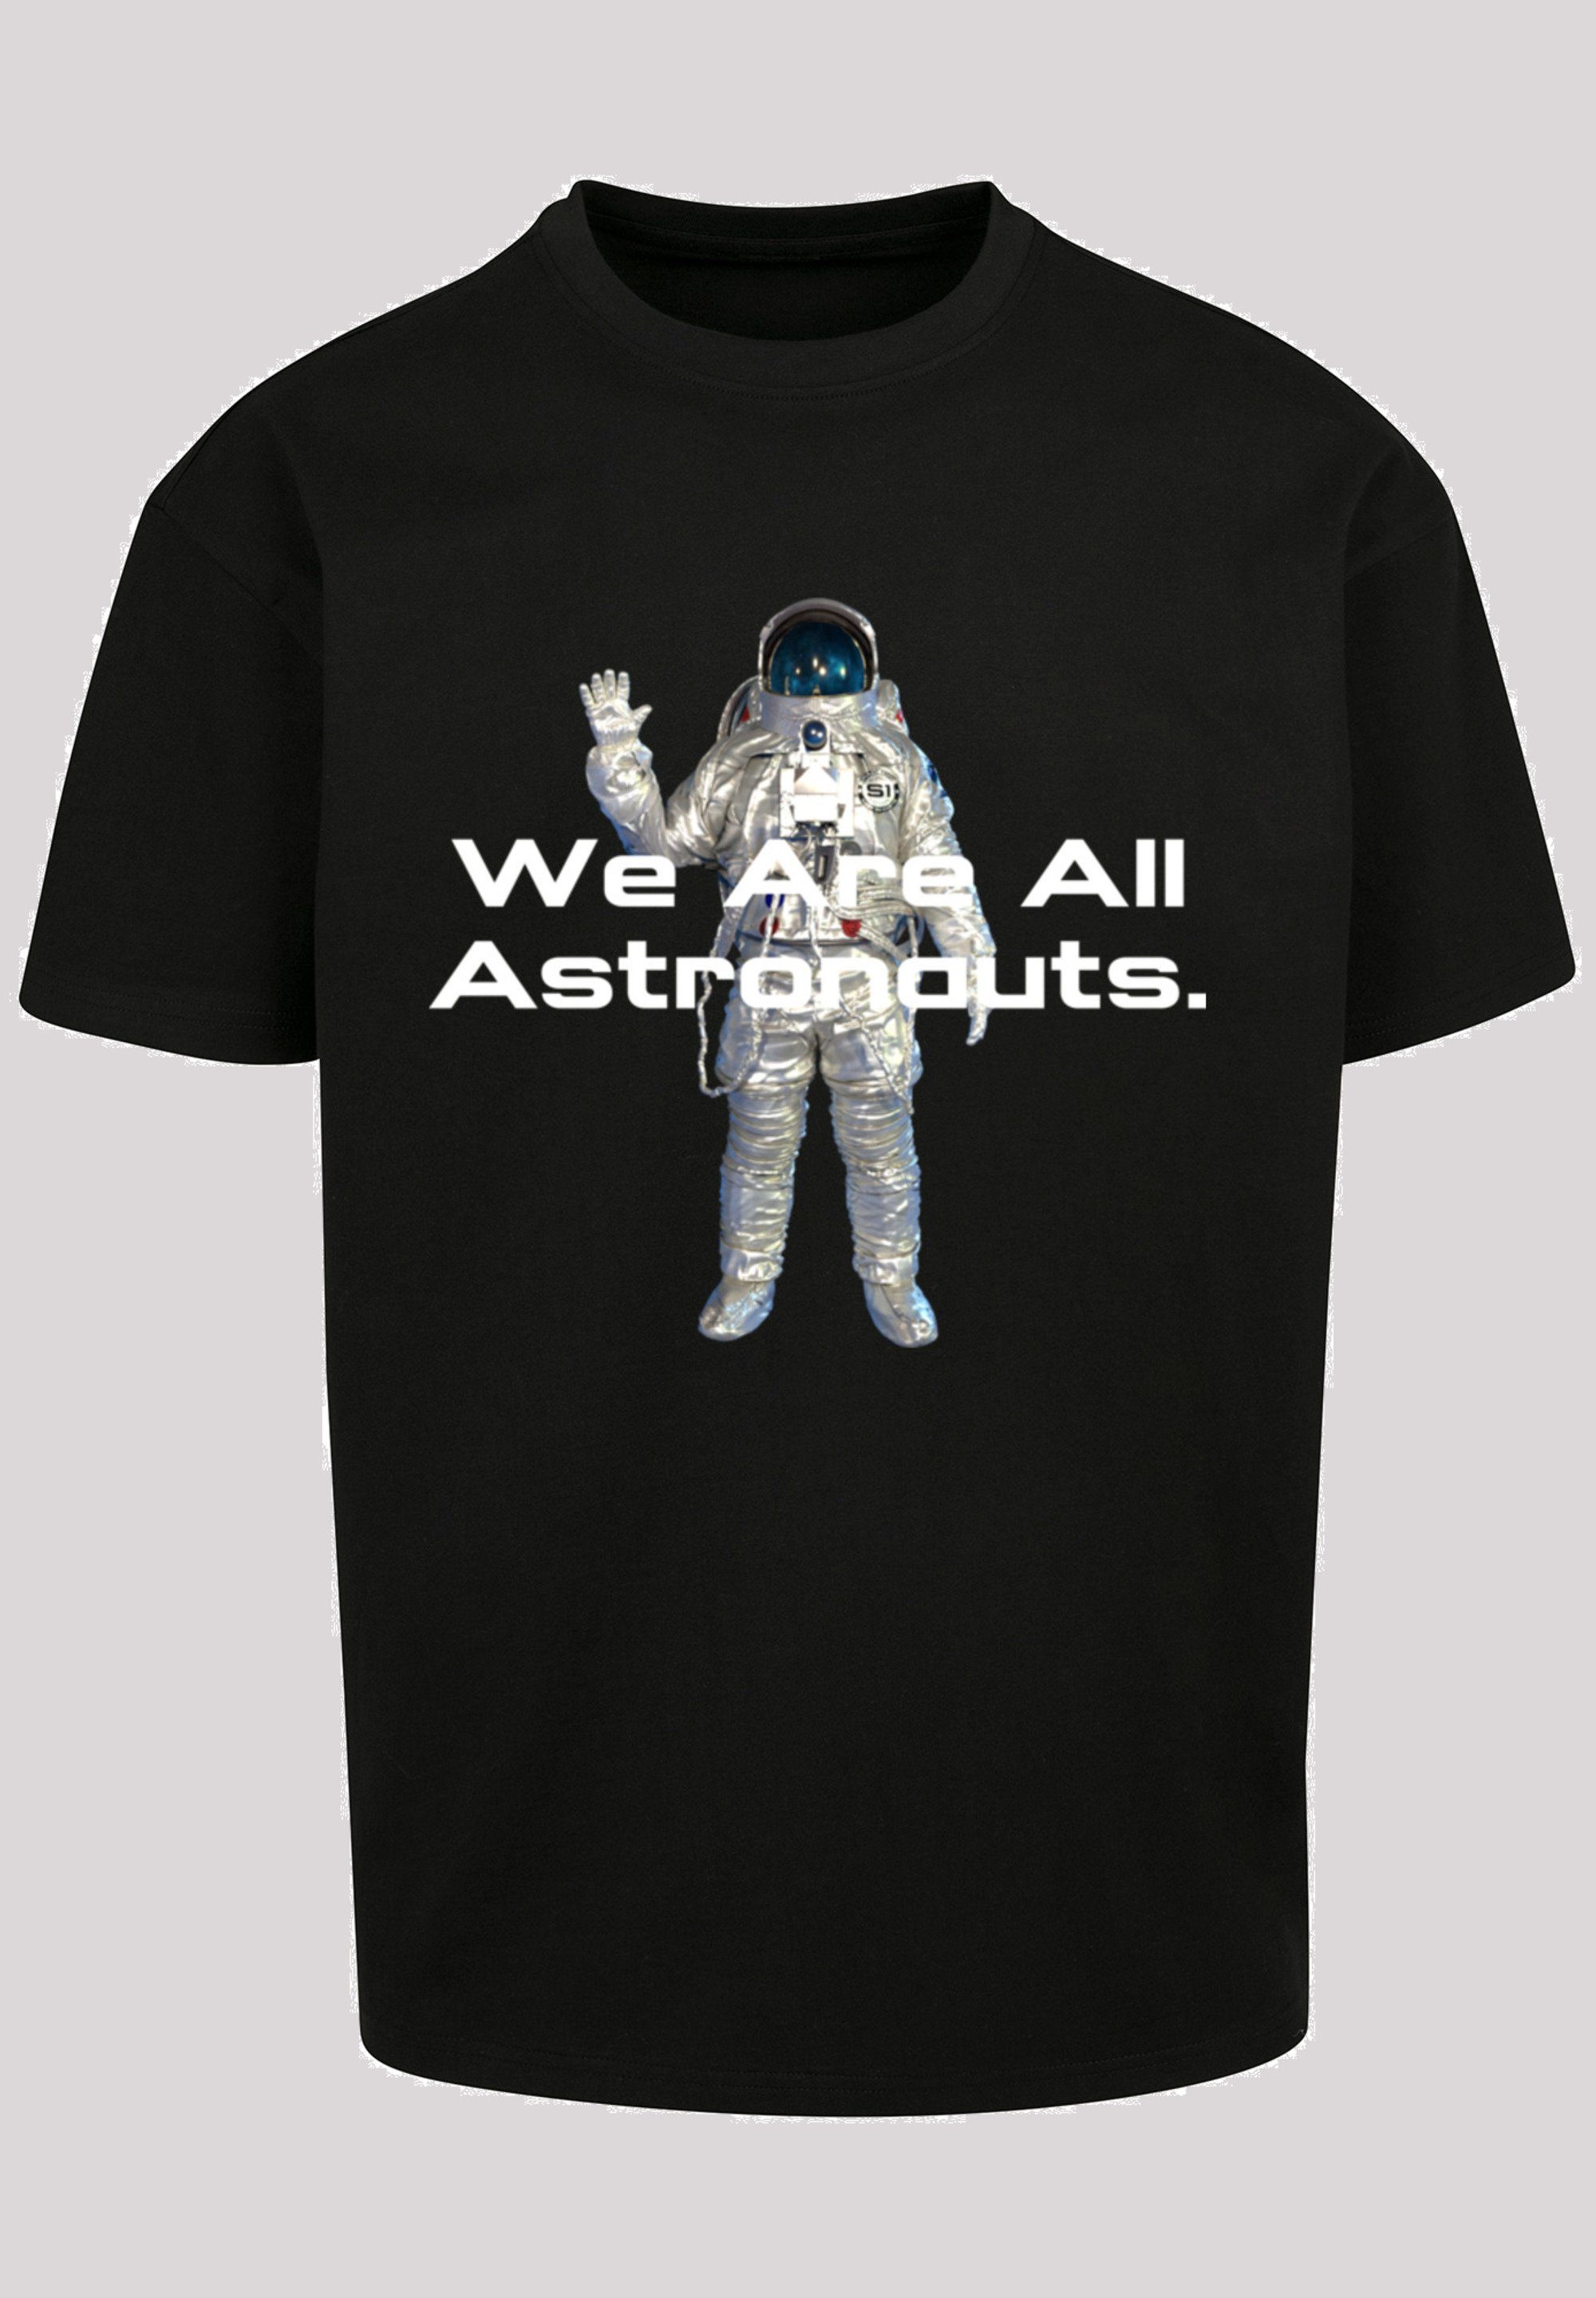 PHIBER schwarz F4NT4STIC all SpaceOne are T-Shirt Print astronauts We